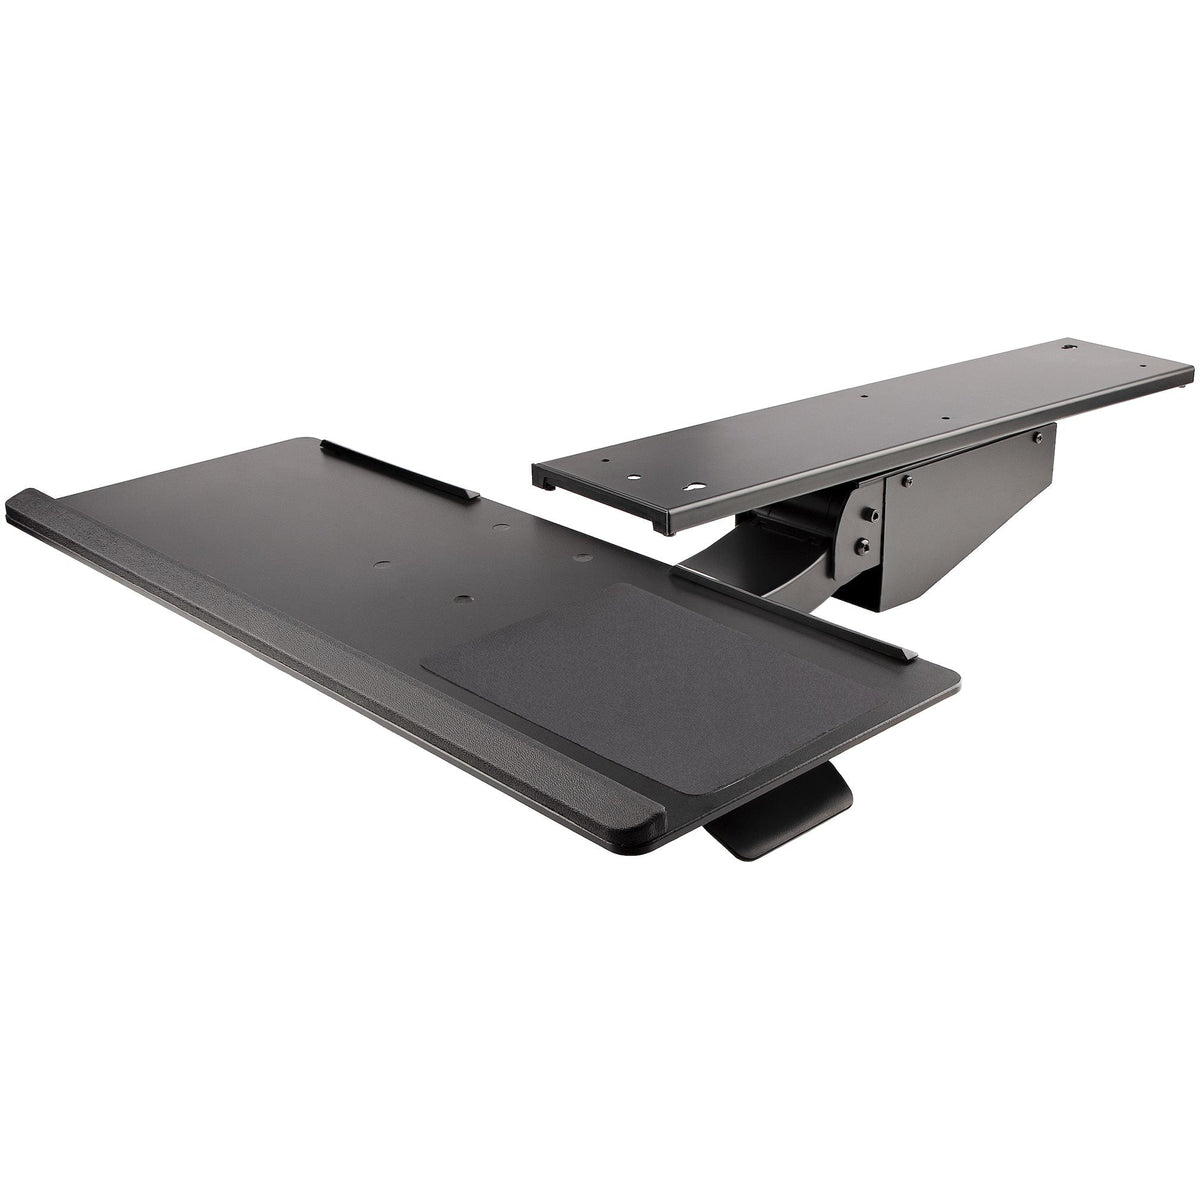 StarTech.com Under Desk Keyboard Tray - Full Motion & Height Adjustable Keyboard and Mouse Tray, 10"x26" Platform - Ergonomic Desk Mount Computer Keyboard Tray with Mouse Pad & Wrist Rest